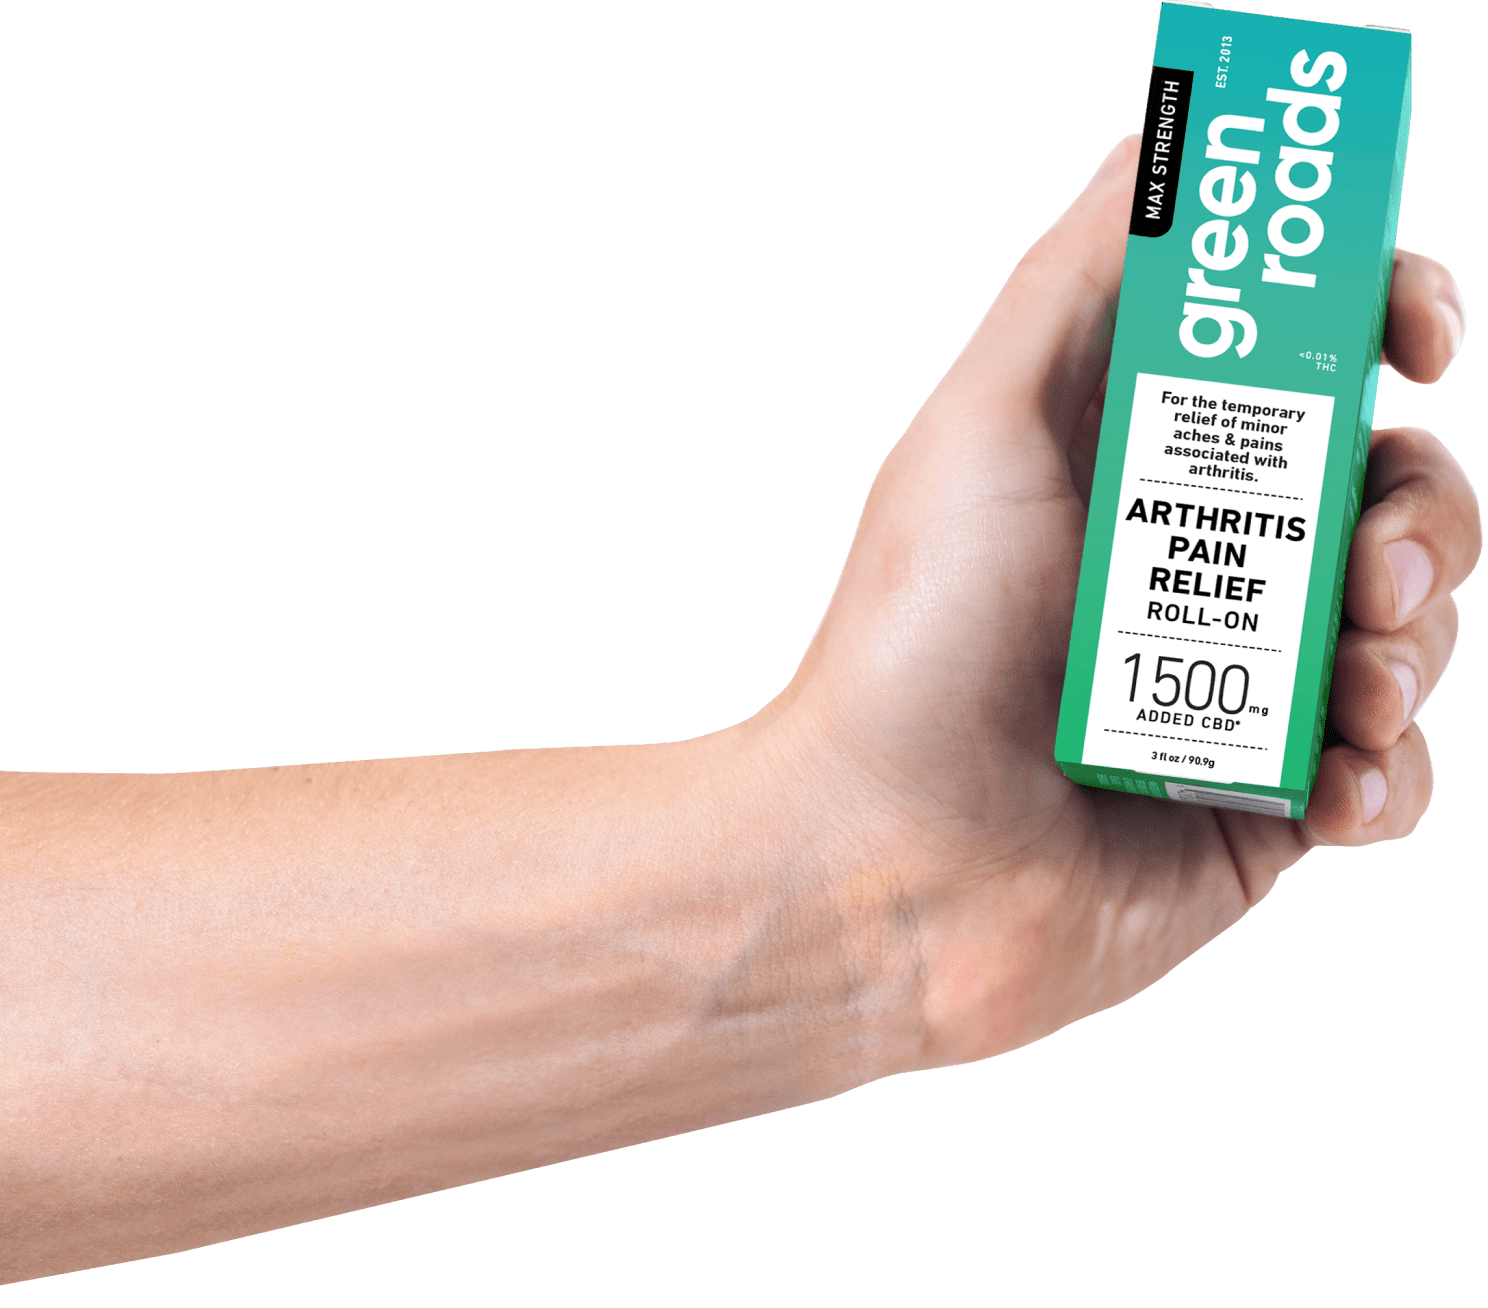 Arm Holding Arthritis Pain Relief Roll-on